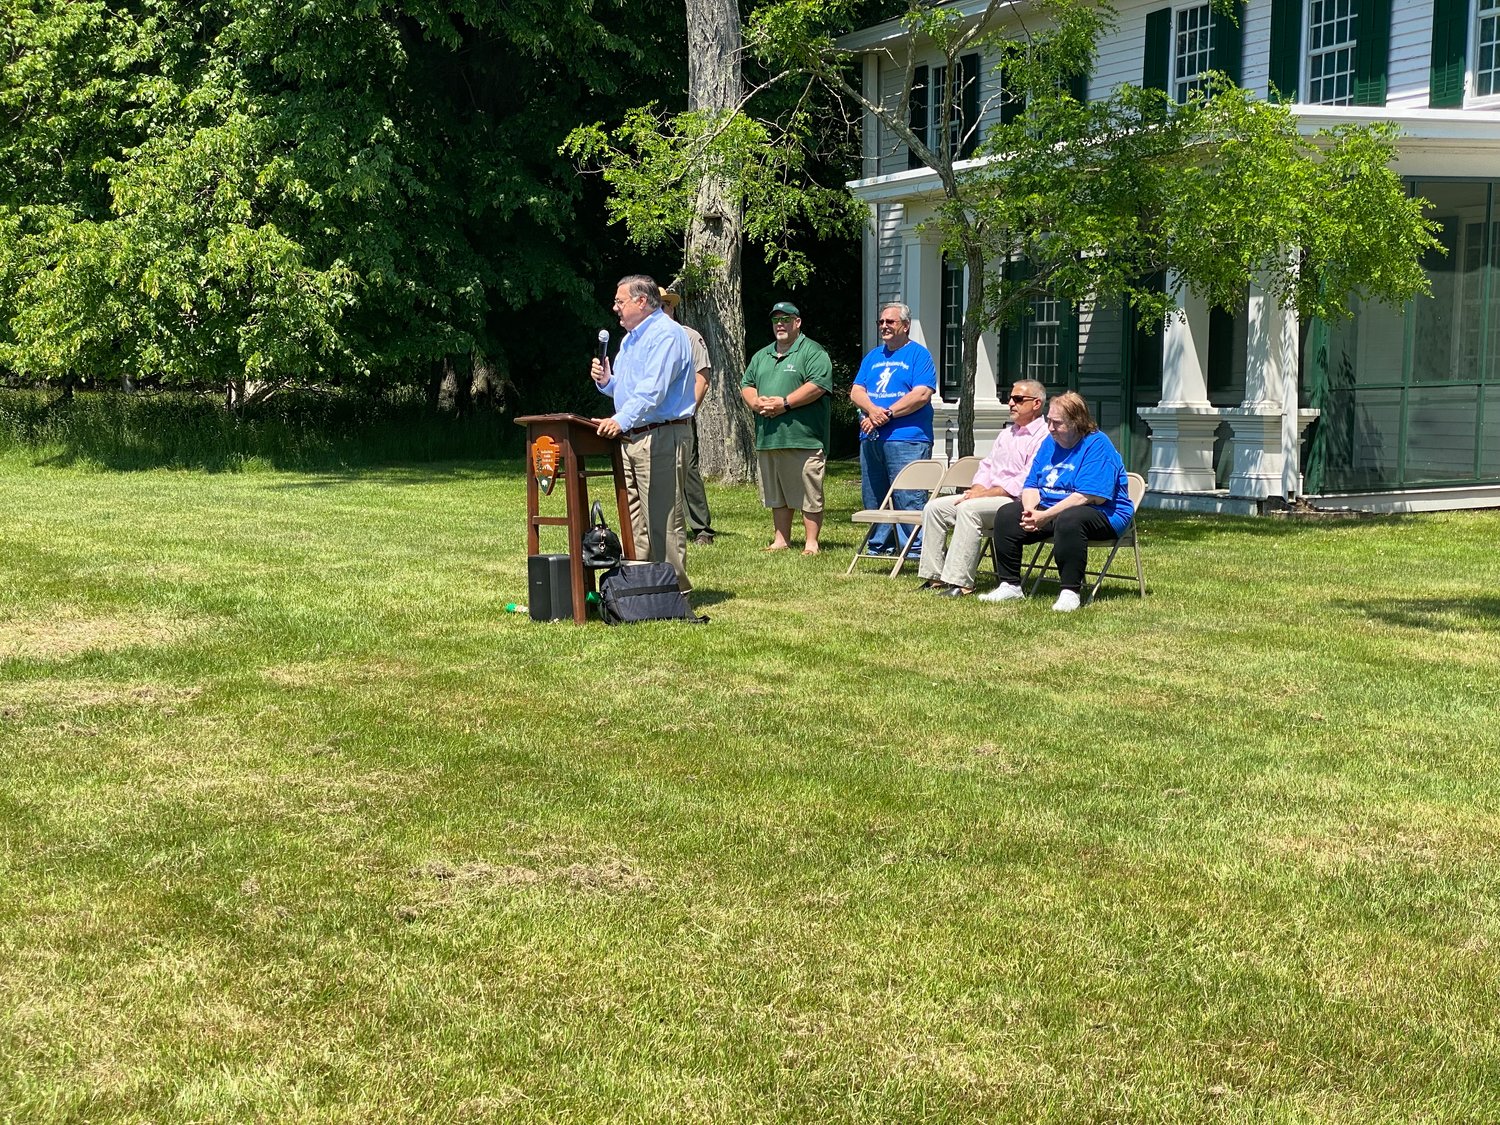 Brookhaven Town Supervisor Ed Romaine speaks at the annual Tri-Hamlet Day event at the William Floyd Manor.